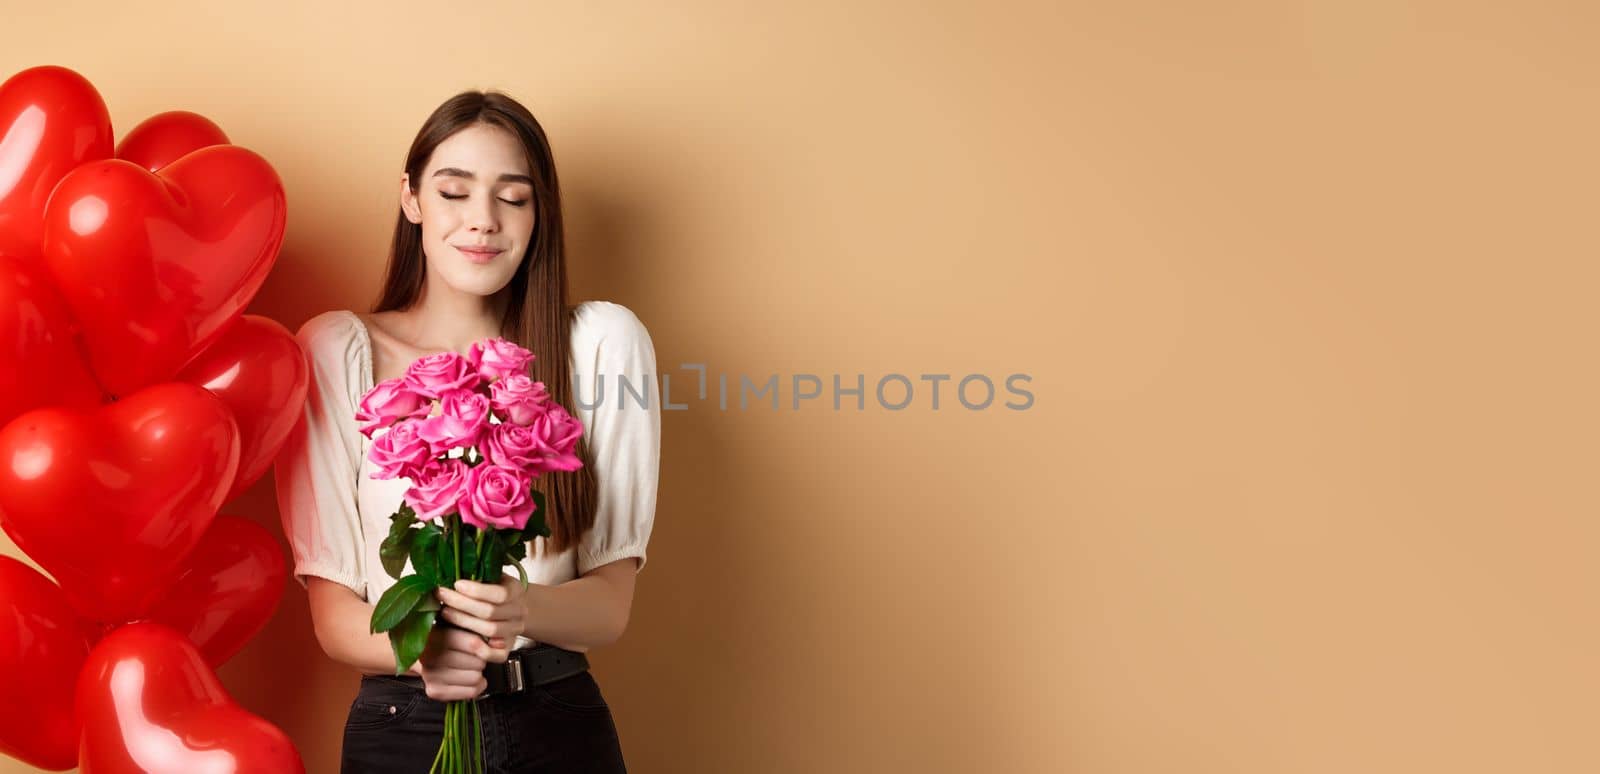 Romantic girlfriend smelling roses, receive flowers from lover on Valentines day, standing near red hearts balloons and smililng, beige background.